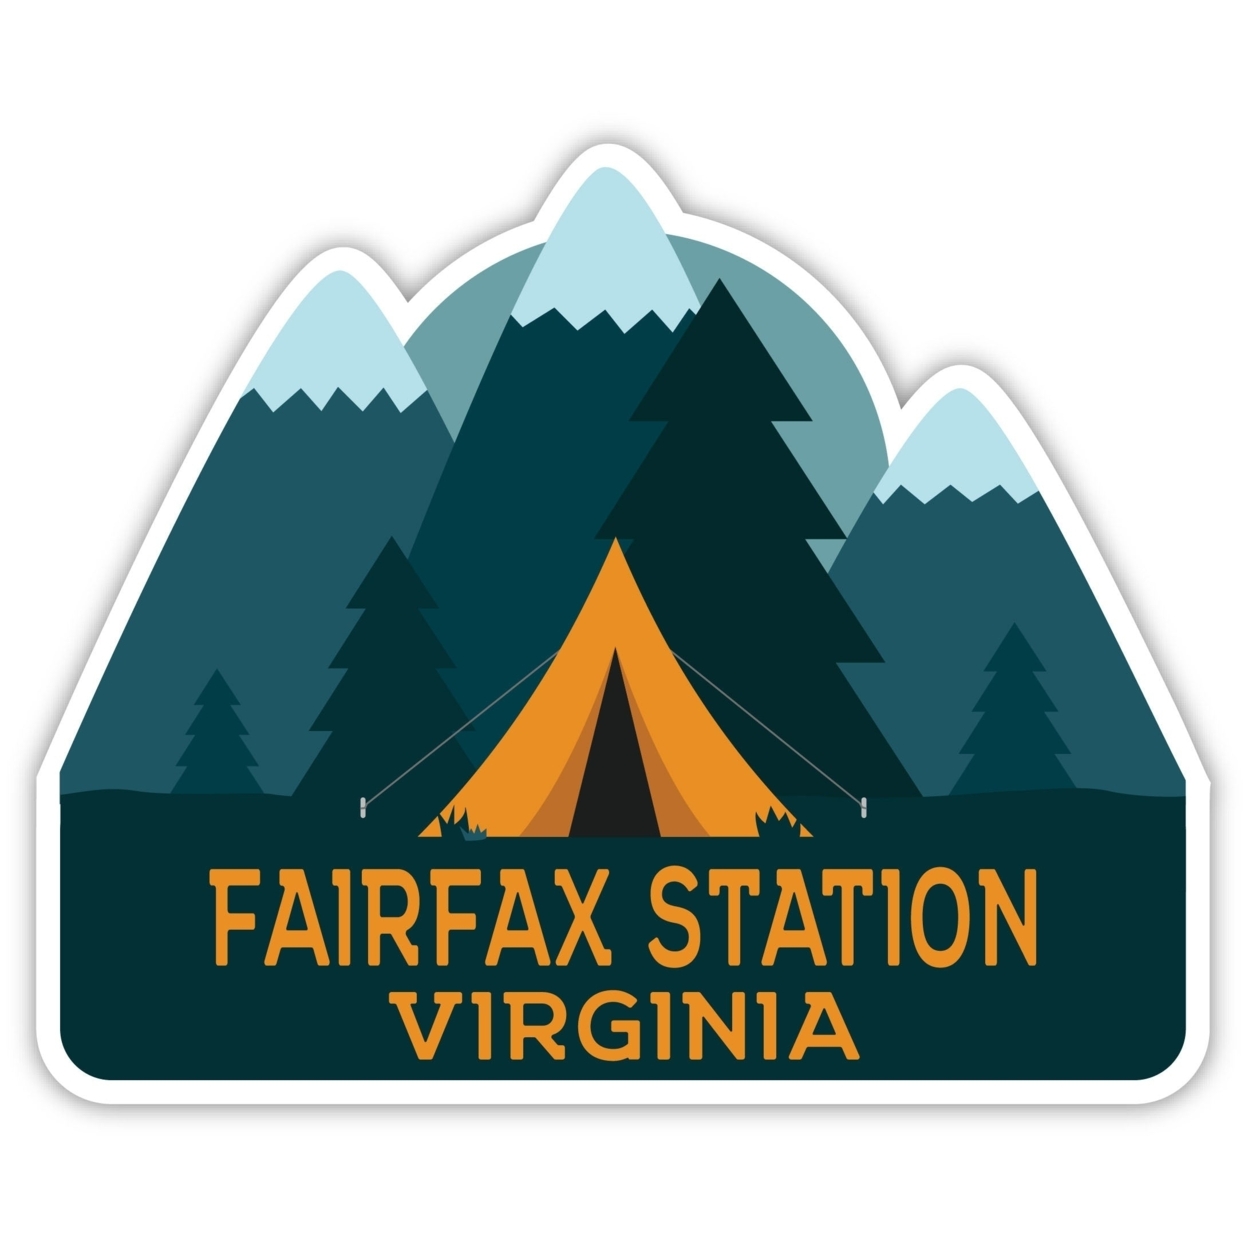 Fairfax Station Virginia Souvenir Decorative Stickers (Choose Theme And Size) - 4-Pack, 8-Inch, Tent